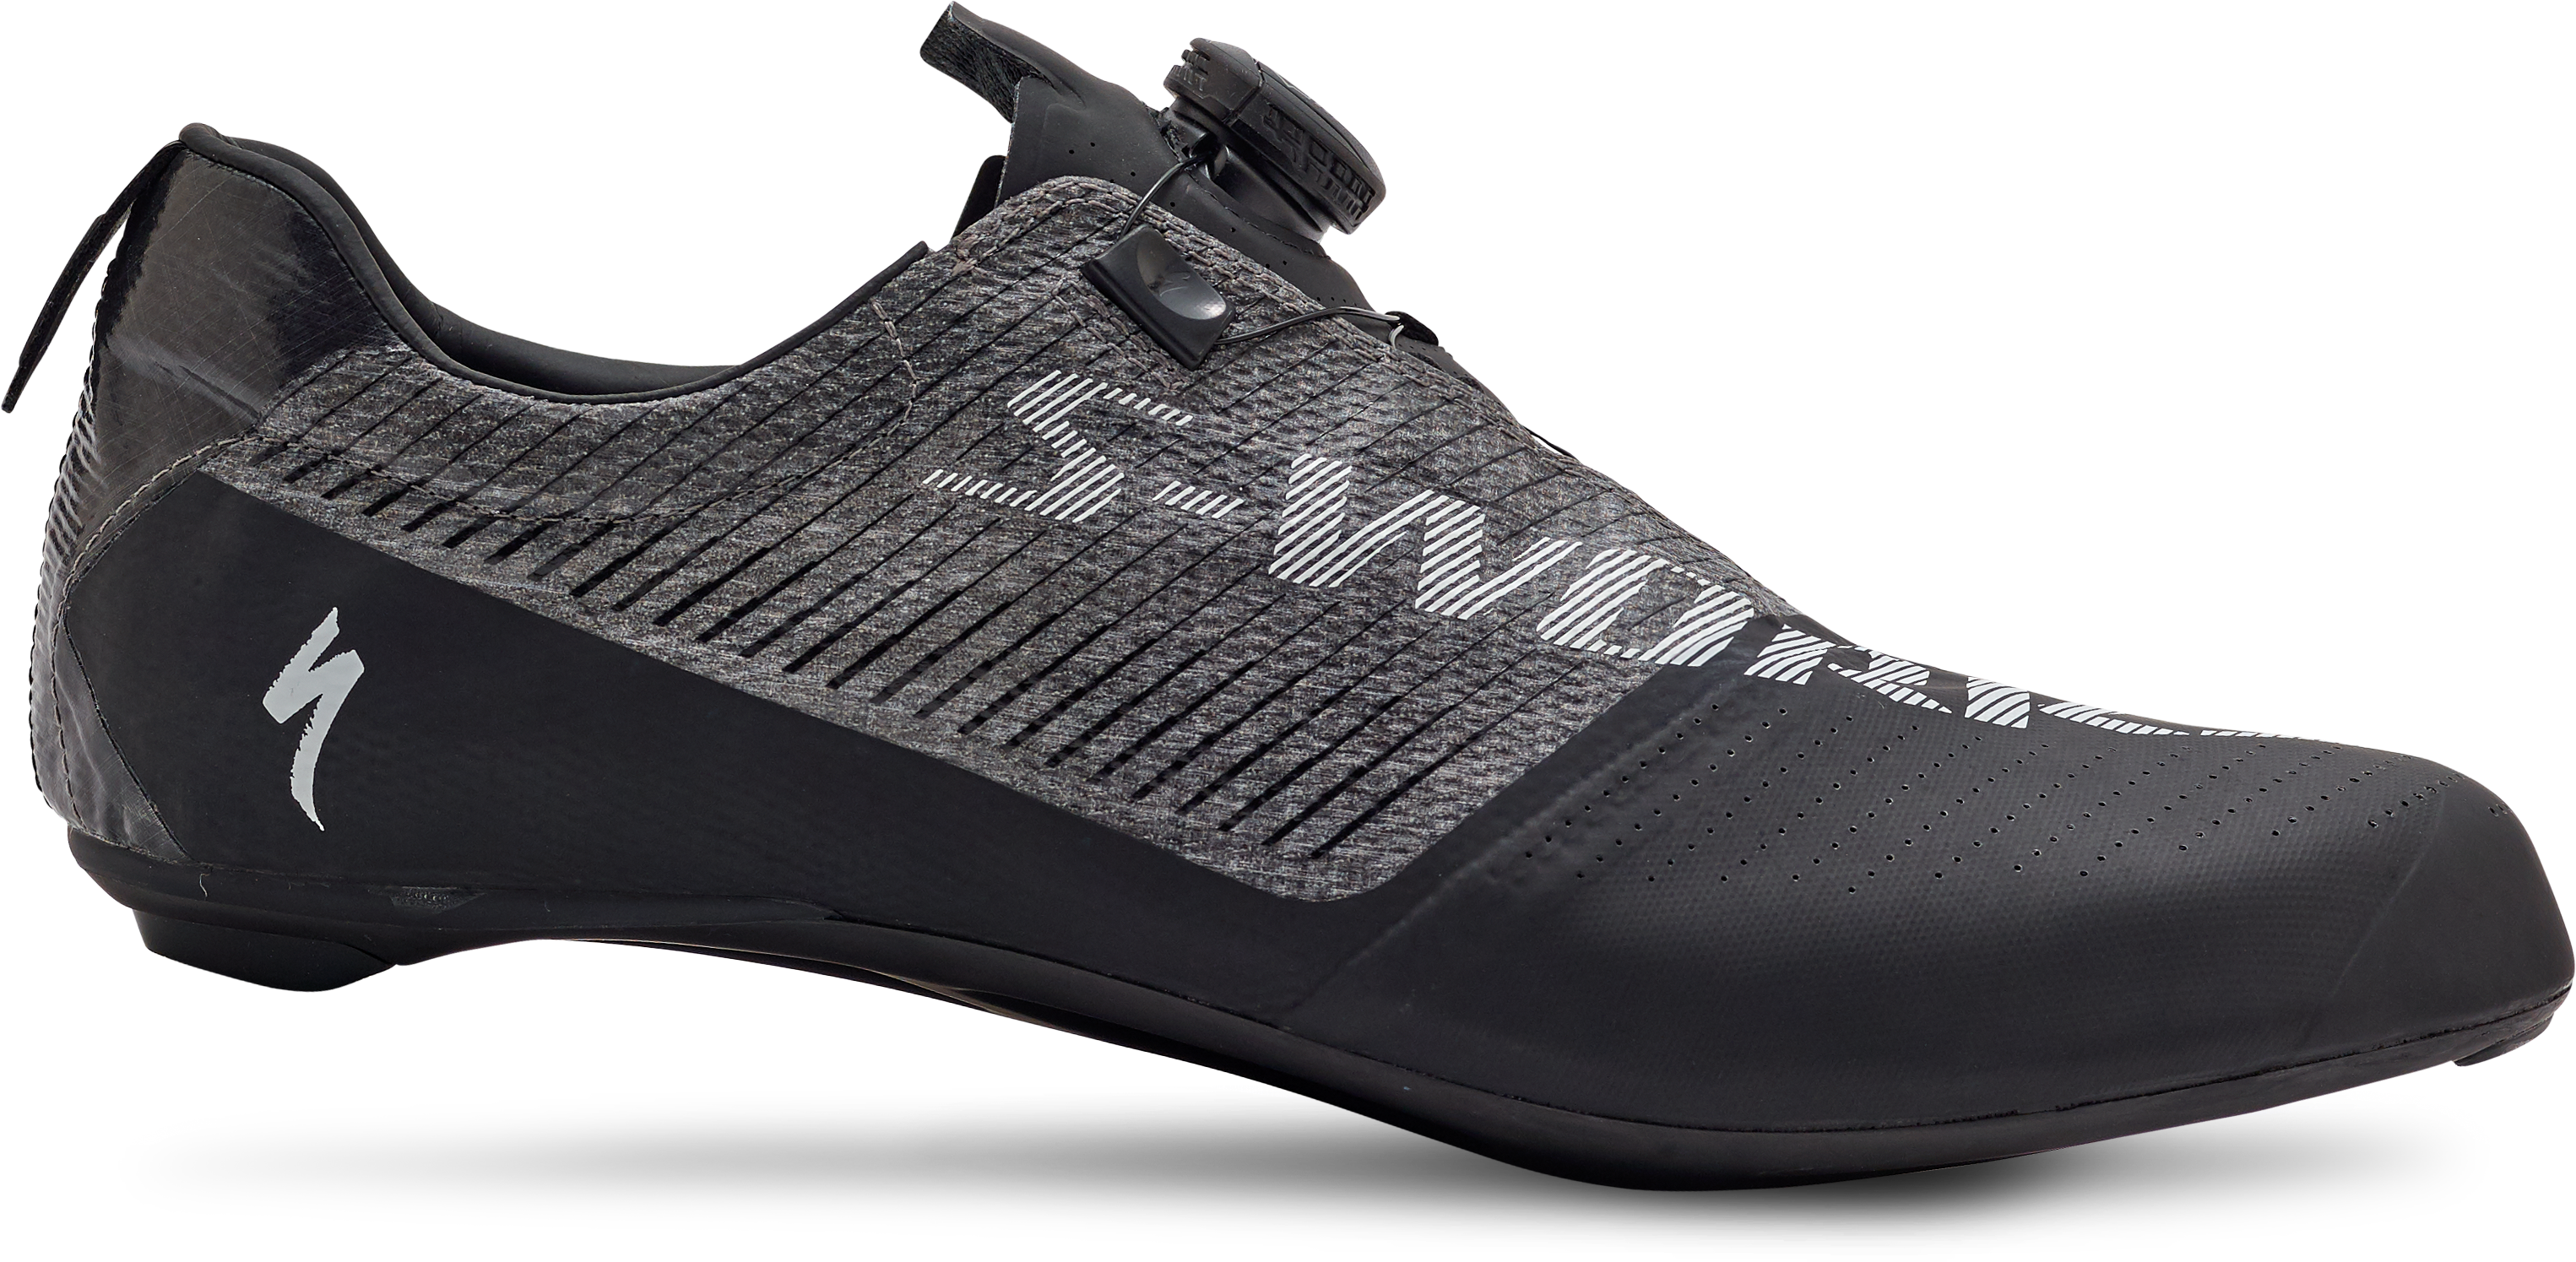 S-Works EXOS Road Shoes | Specialized.com